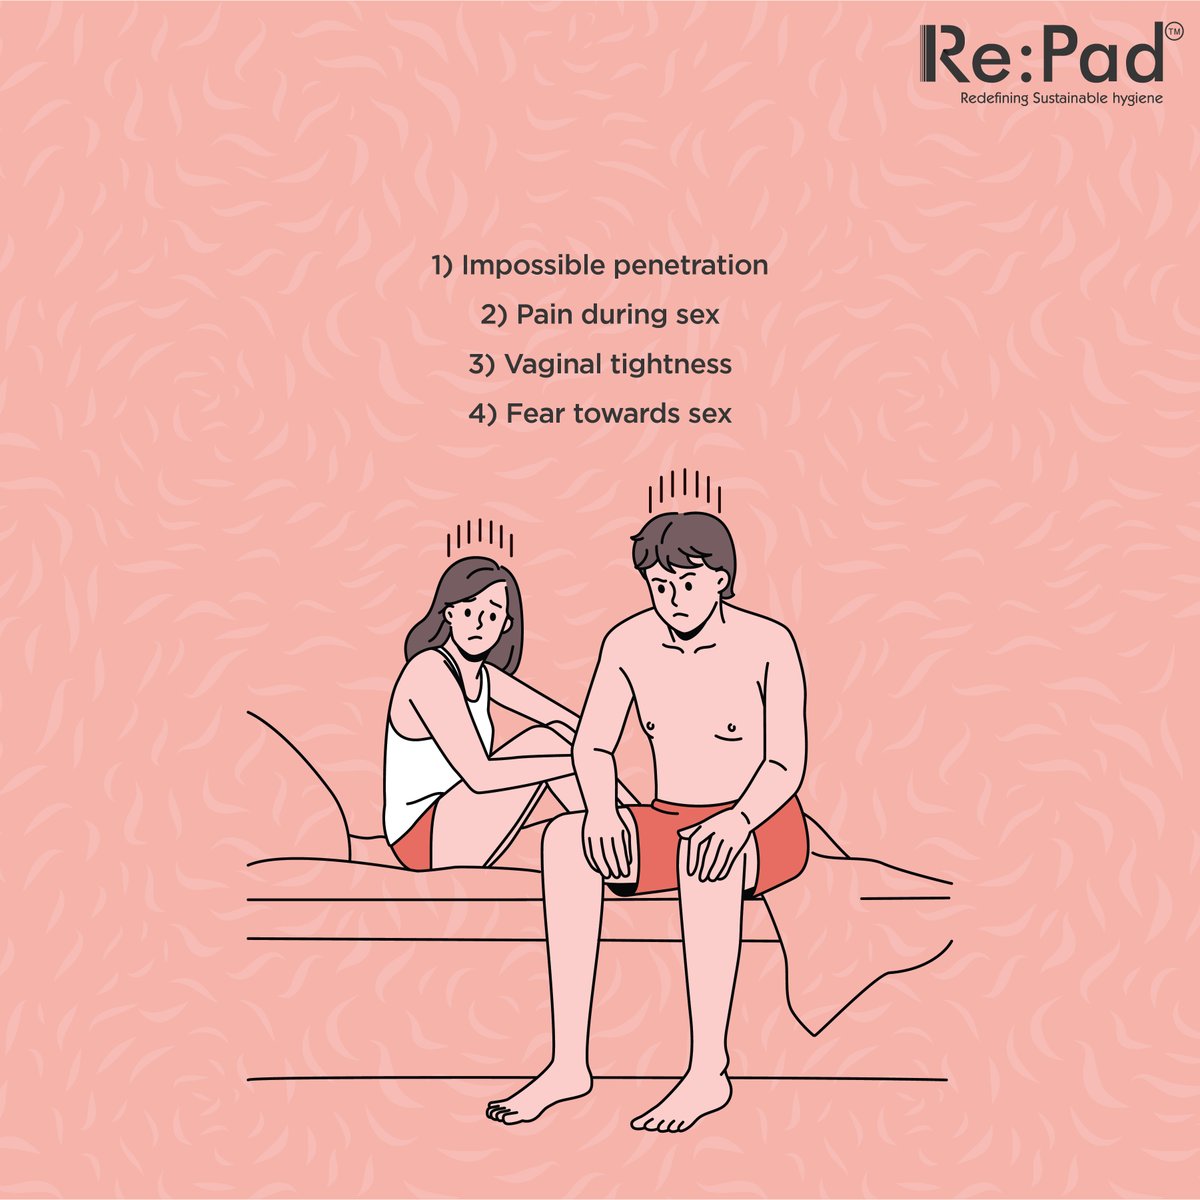 Vaginismus is an automatic reaction of the body towards vaginal penetration. It is entirely possible to treat vaginismus, once the underlying cause is discovered.
#Repad #clothpads #womenhealth #womenhygine #menstrualhealth #sustainablemenstruation #vaginisumssymptoms #vaginismus